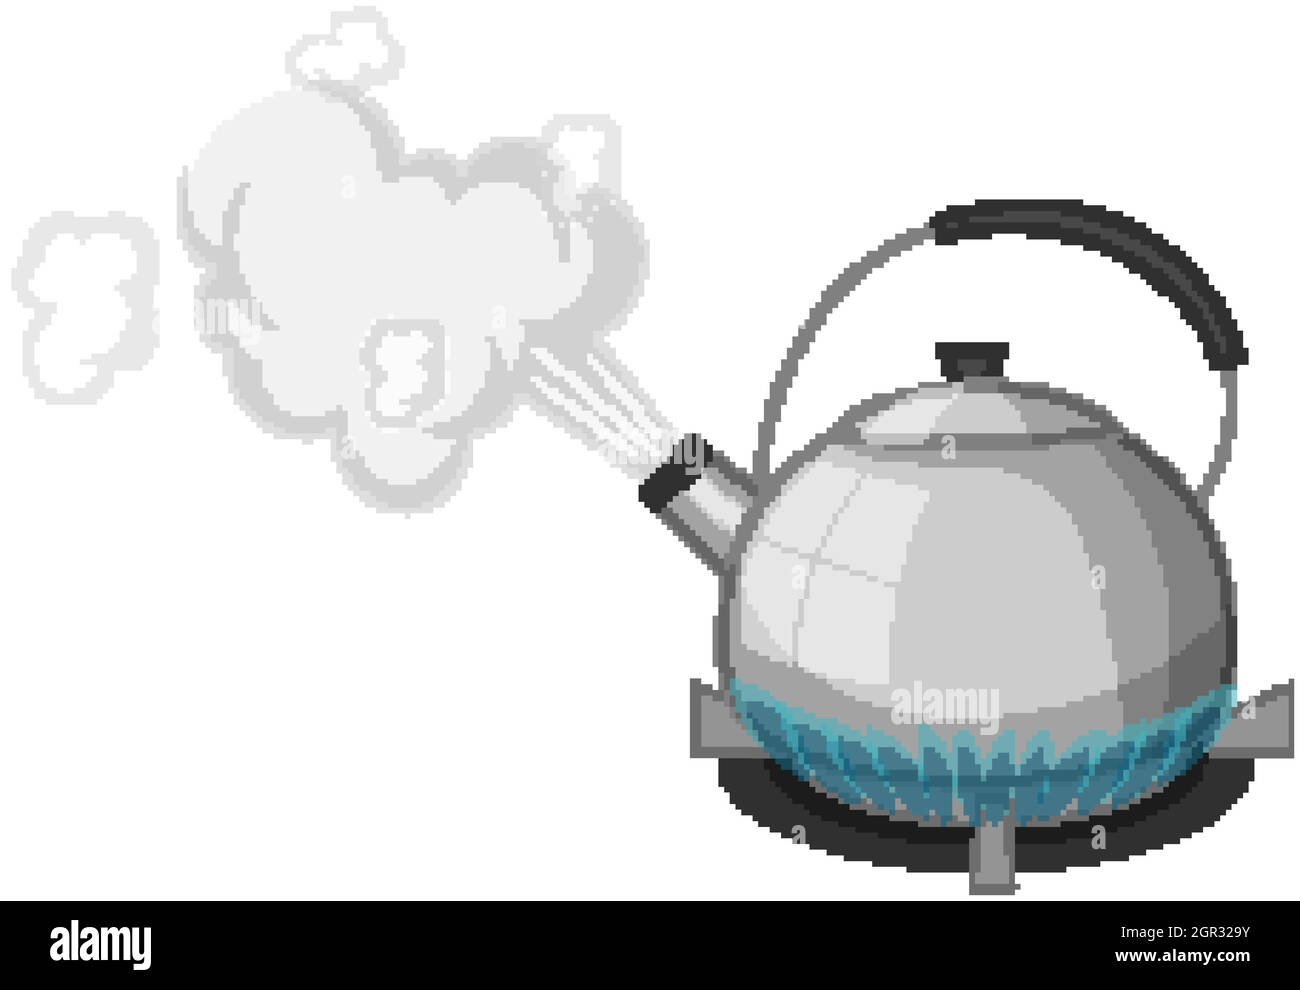 https://c8.alamy.com/comp/2GR329Y/stainless-steel-kettle-with-boiling-water-on-stove-cartoon-style-isolated-on-white-background-2GR329Y.jpg